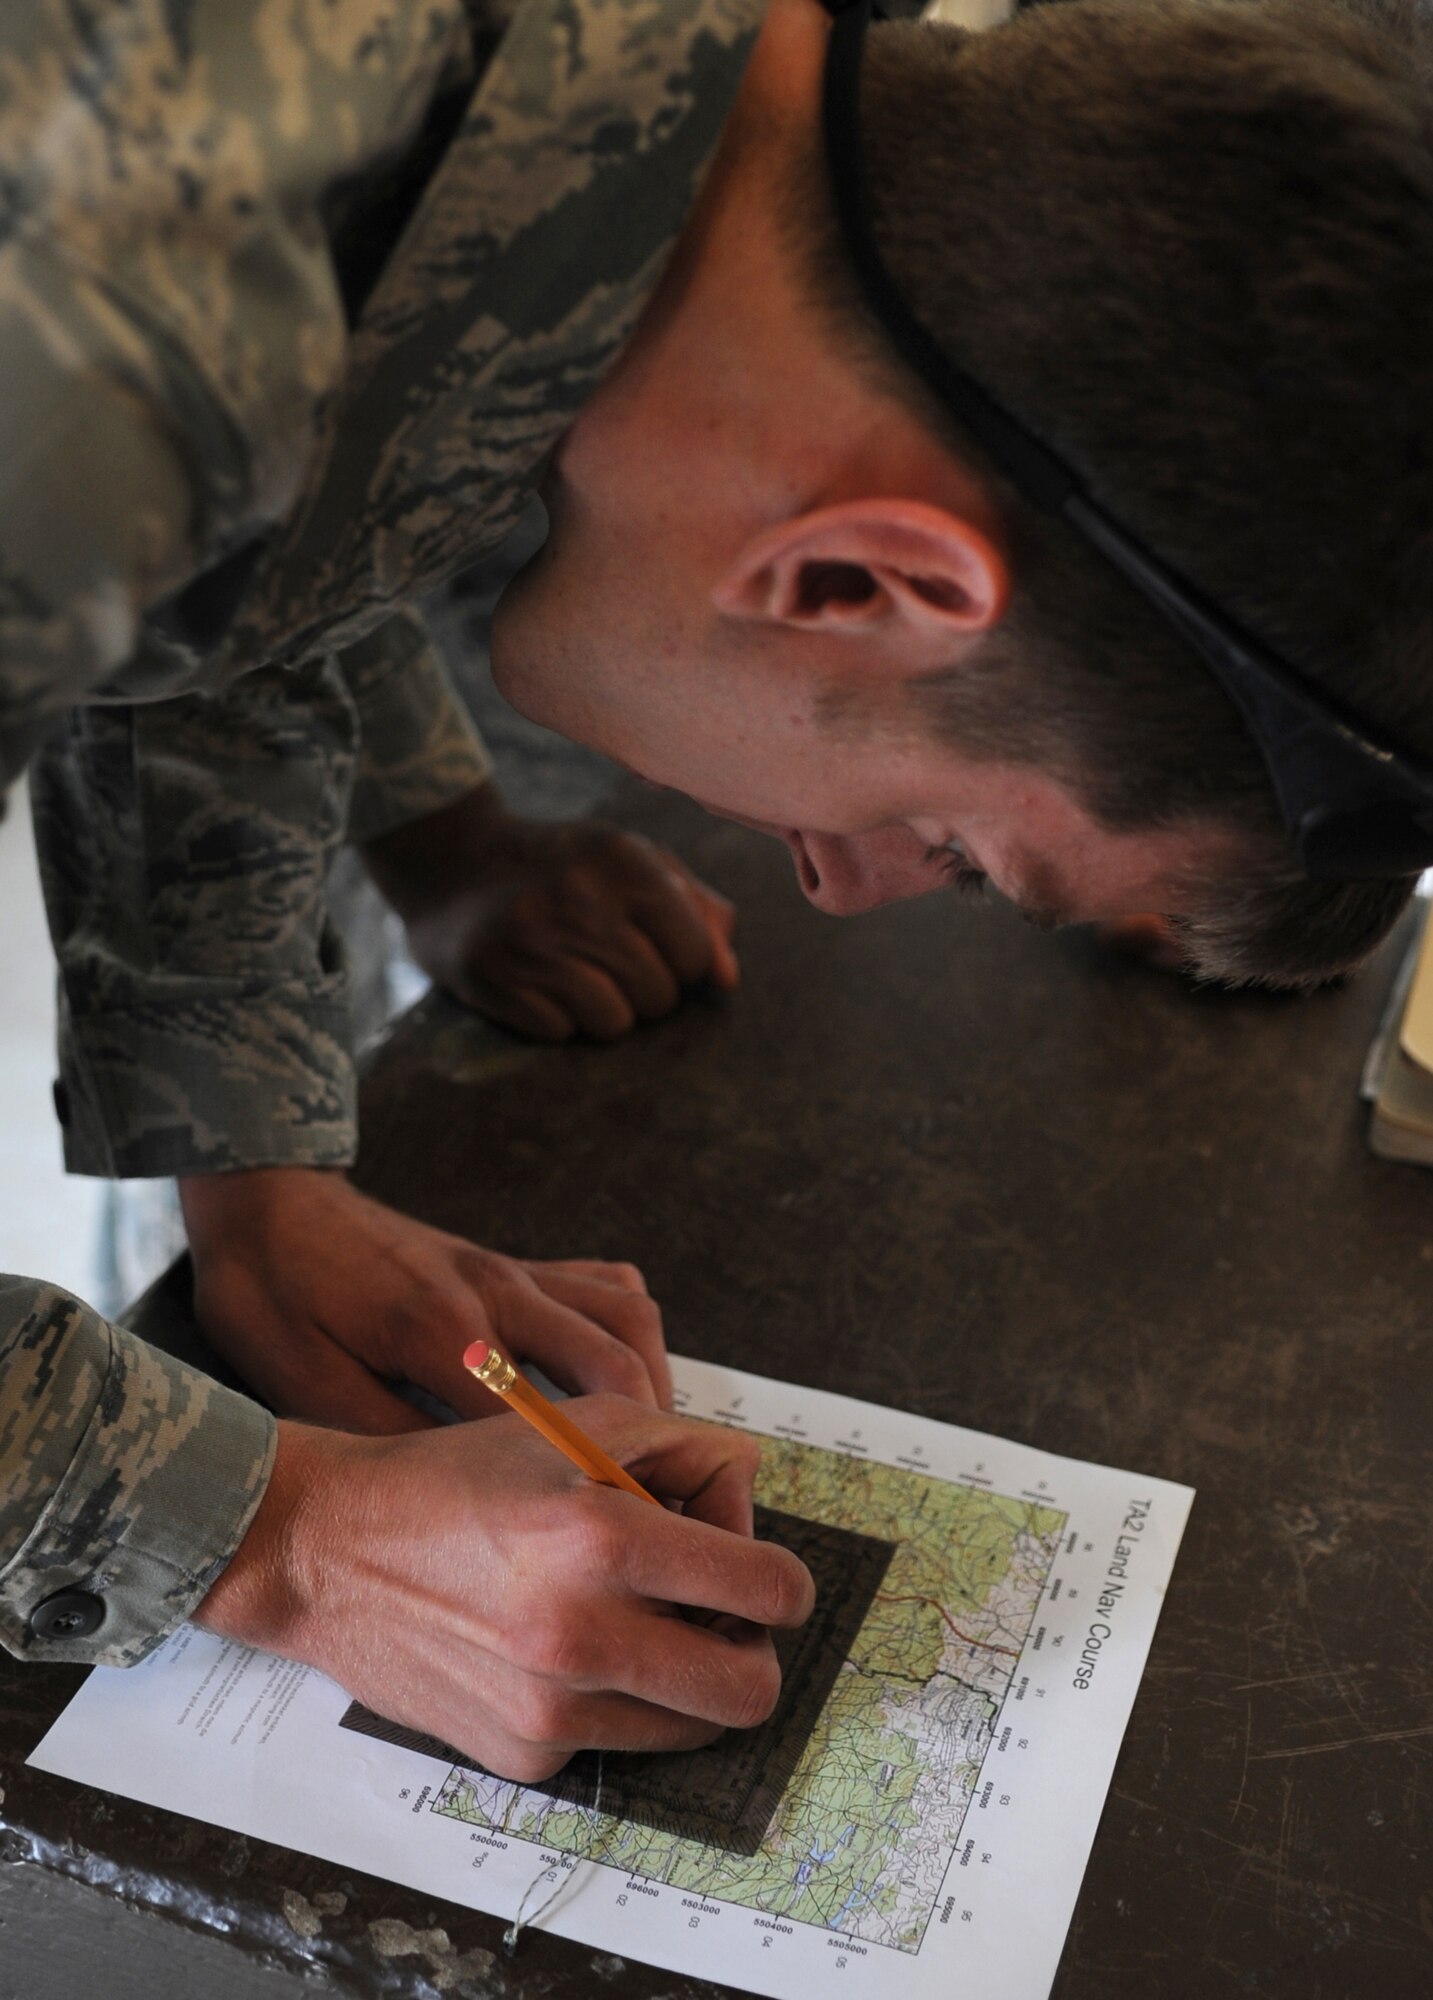 U.S. Air Force Staff Sgt. Nicholas Nelson, 8th Air Support Operations Squadron radio frequency transmission journeyman stationed at Aviano Air Base, Italy, plots way points on a map for a land navigation course during exercise ALLIED STRIKE 10, Grafenwoehr, Germany, July 25, 2010. AS 10 is Europe's premier close air support (CAS) exercise, held annually to conduct robust, realistic CAS training that helps build partnership capacity among allied North Atlantic Treaty Organization nations and joint services while refining the latest operational CAS tactics. For more ALLIED STRIKE information go to www.usafe.af.mil/alliedstrike.asp. (U.S. Air Force photo by Senior Airman Caleb Pierce) 